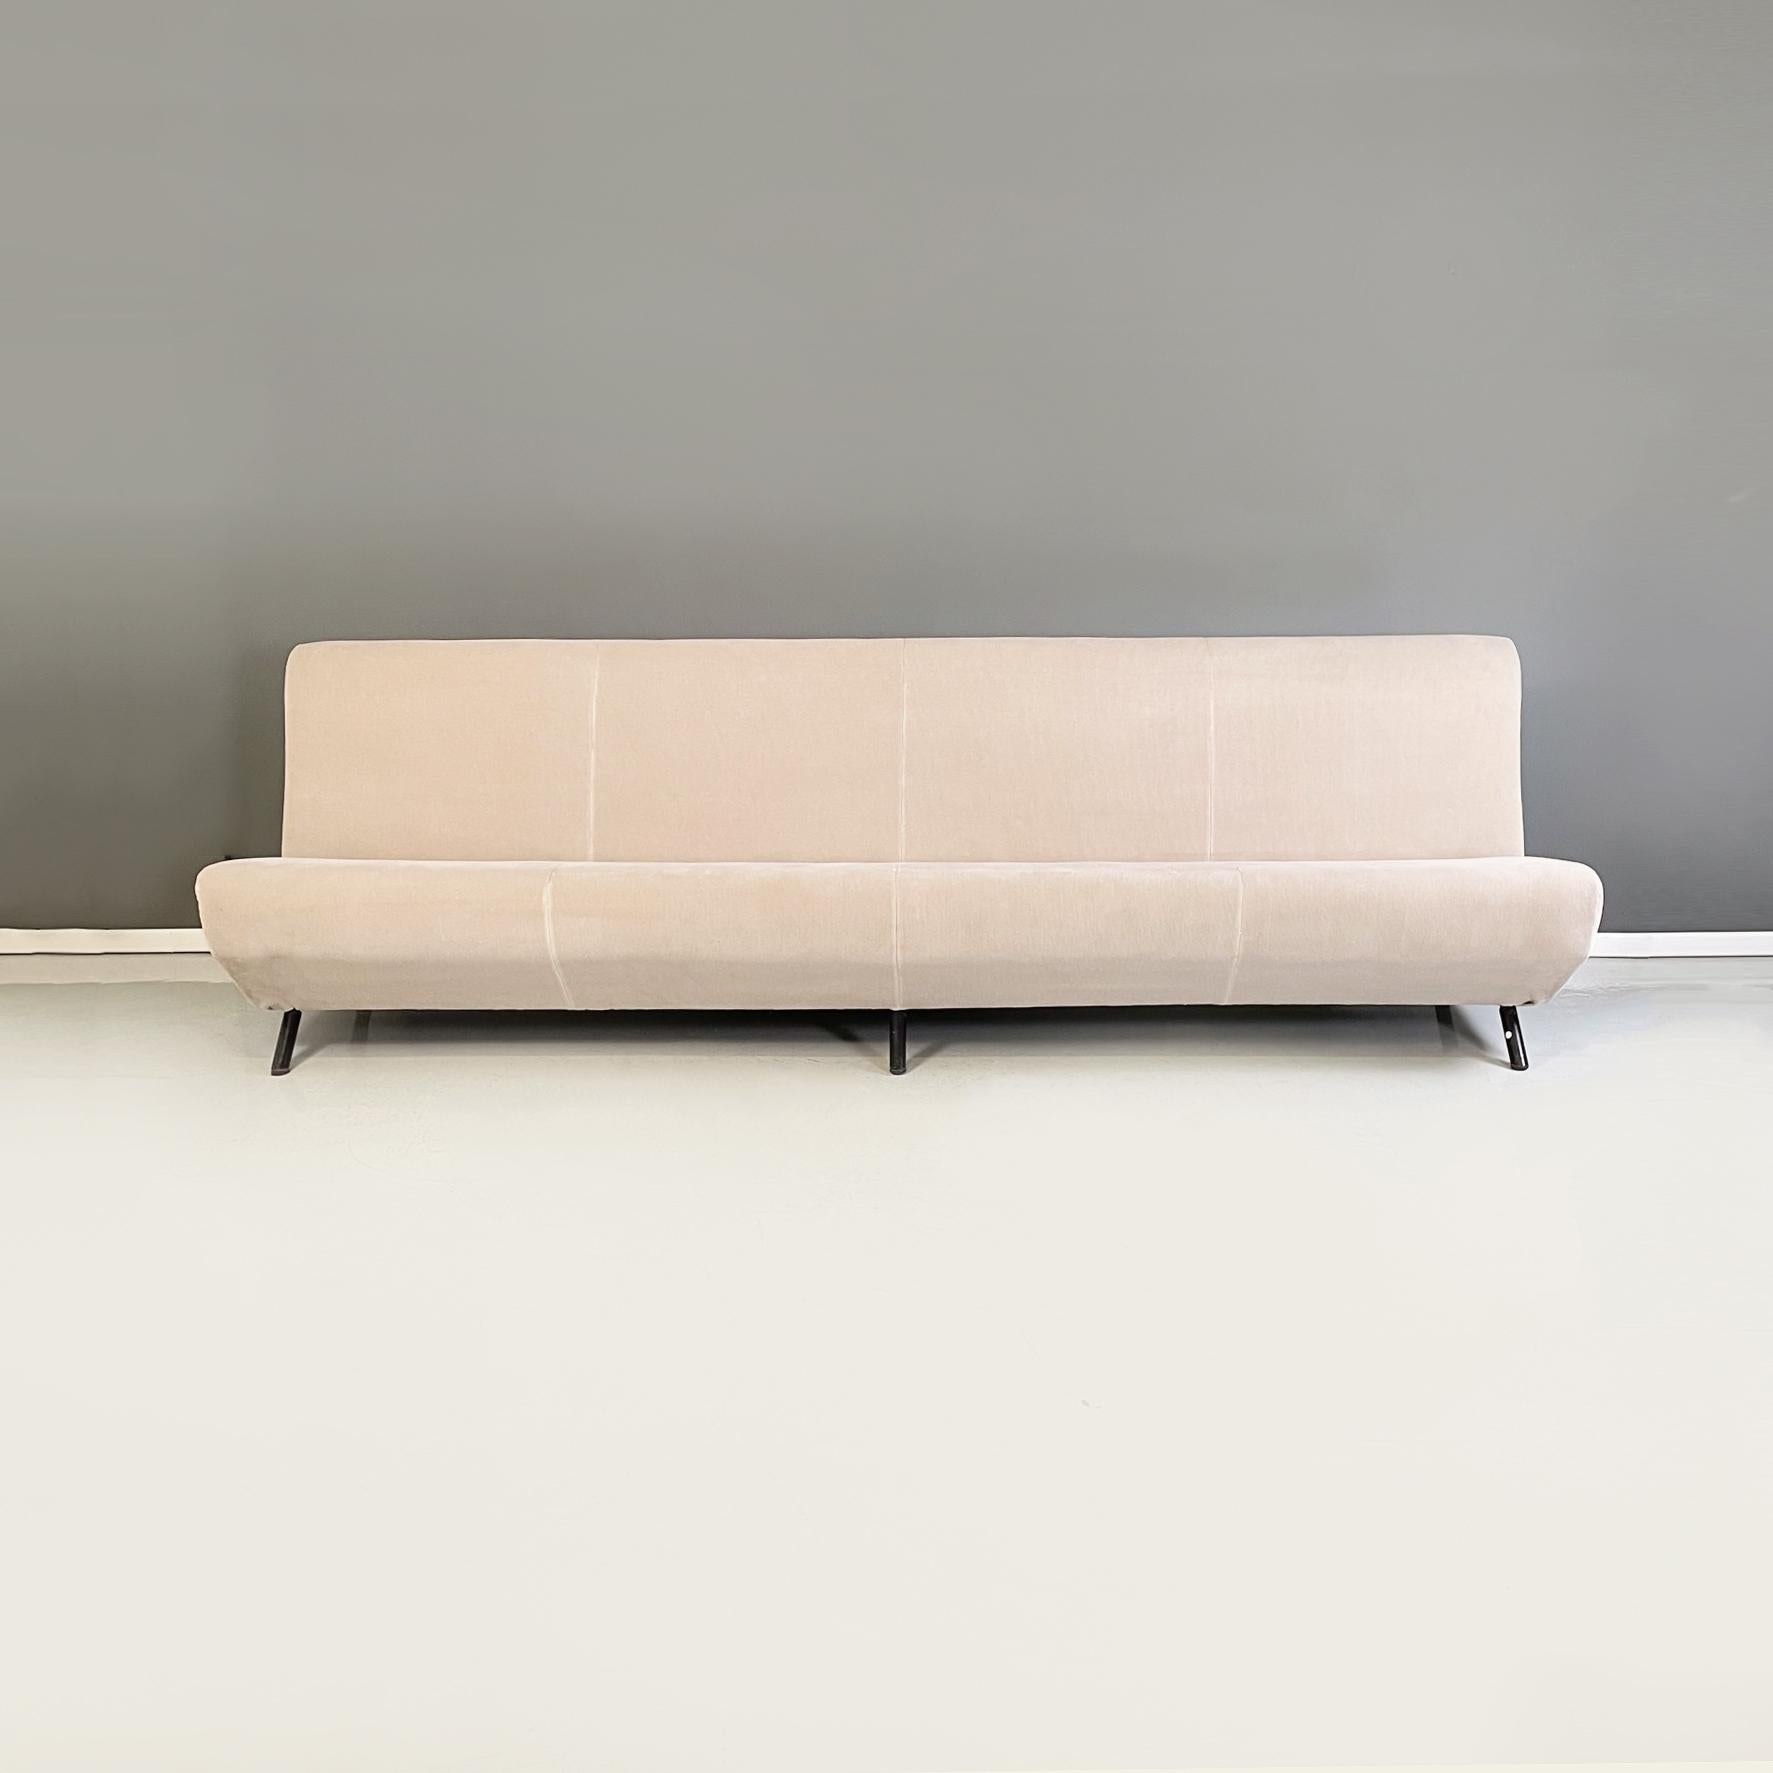 Italian midcentury Beige velvet Sofa Triennale by Marco Zanuso for Arflex, 1956
Iconic four seater sofa mod. Triennale with fully padded seat and back covered in beige velvet tan corduroy. Internal structure in metal. Round section legs in black